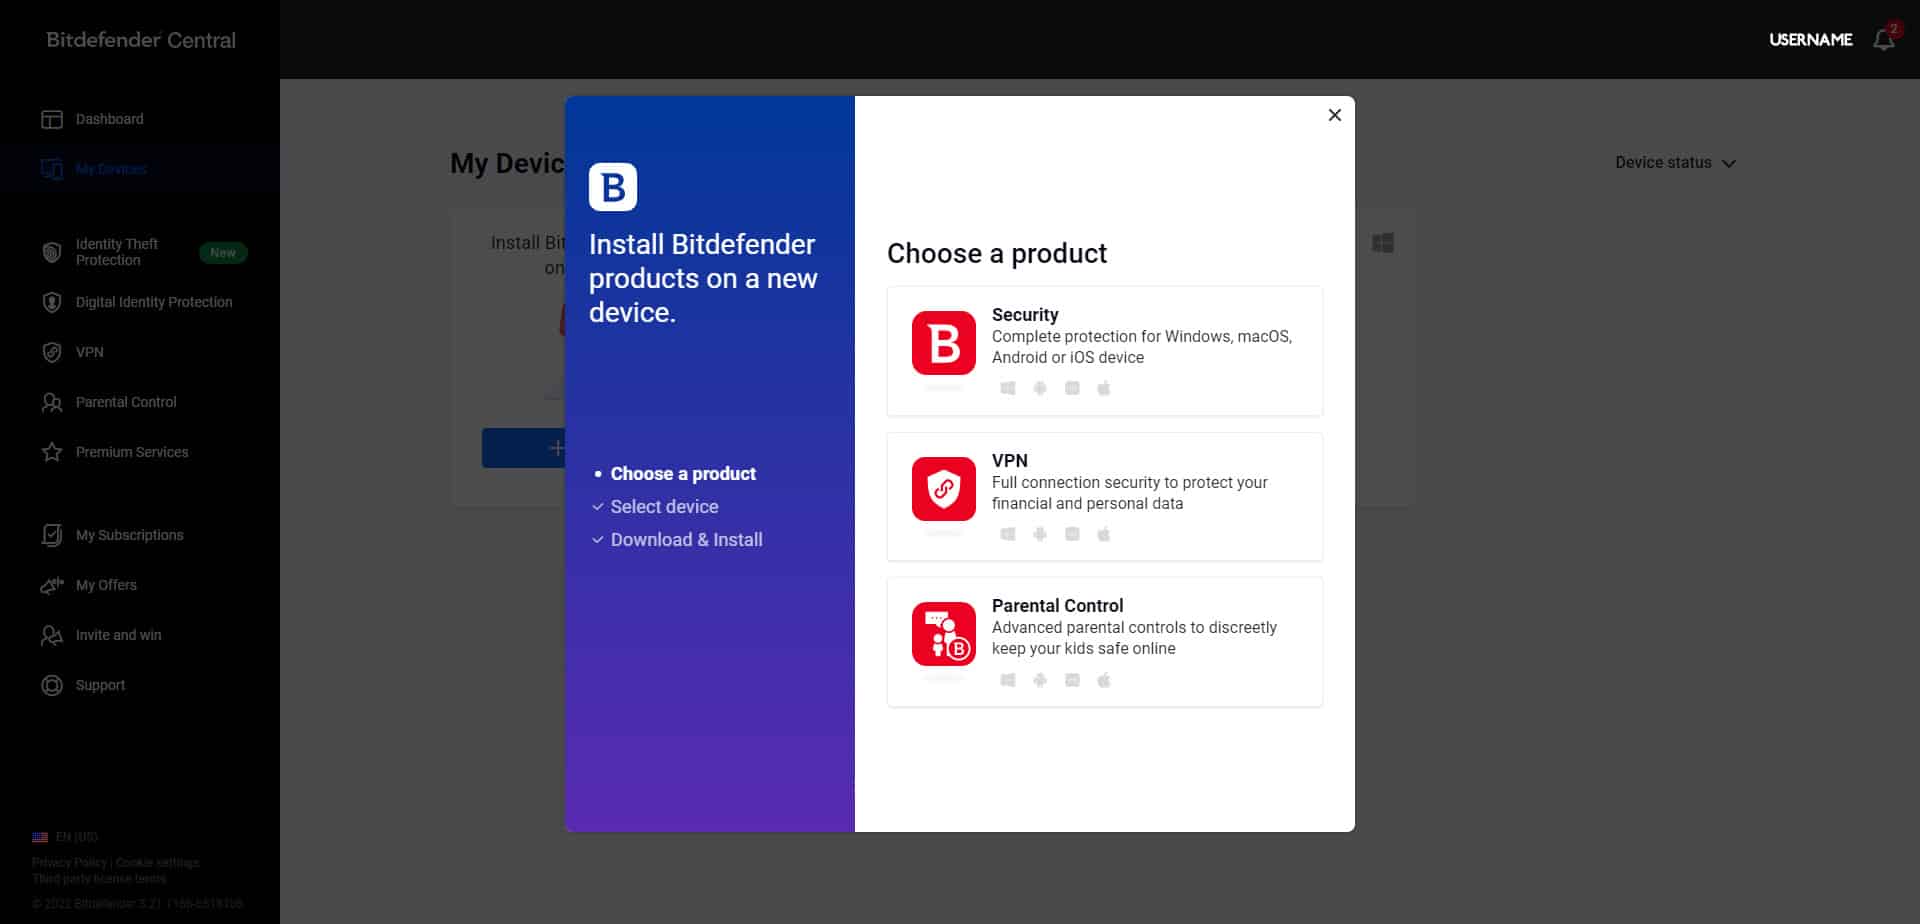 Bitdefender Allows You to Install Products for Different Operating Systems and Devices from One Place